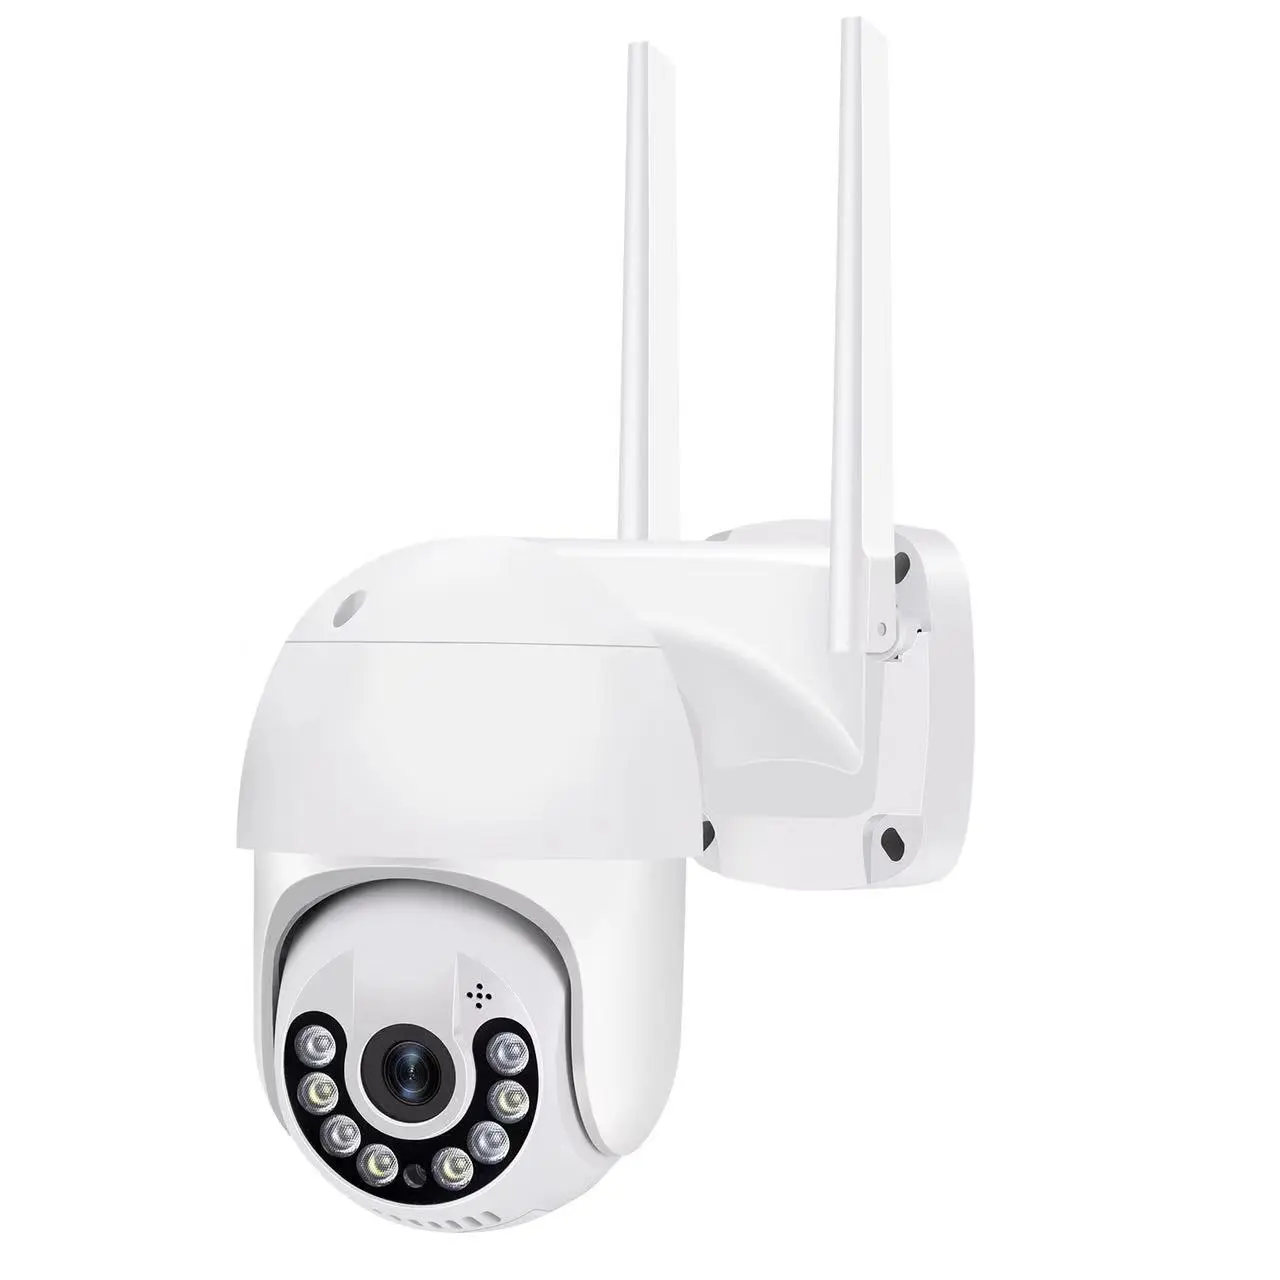 8MP 5MP 3MP 2.4Ghz WiFi IP PTZ Cam 1080P HD Outdoor Night Vision Waterproof CCTV Security Dome Camera 5X Digital Zoom